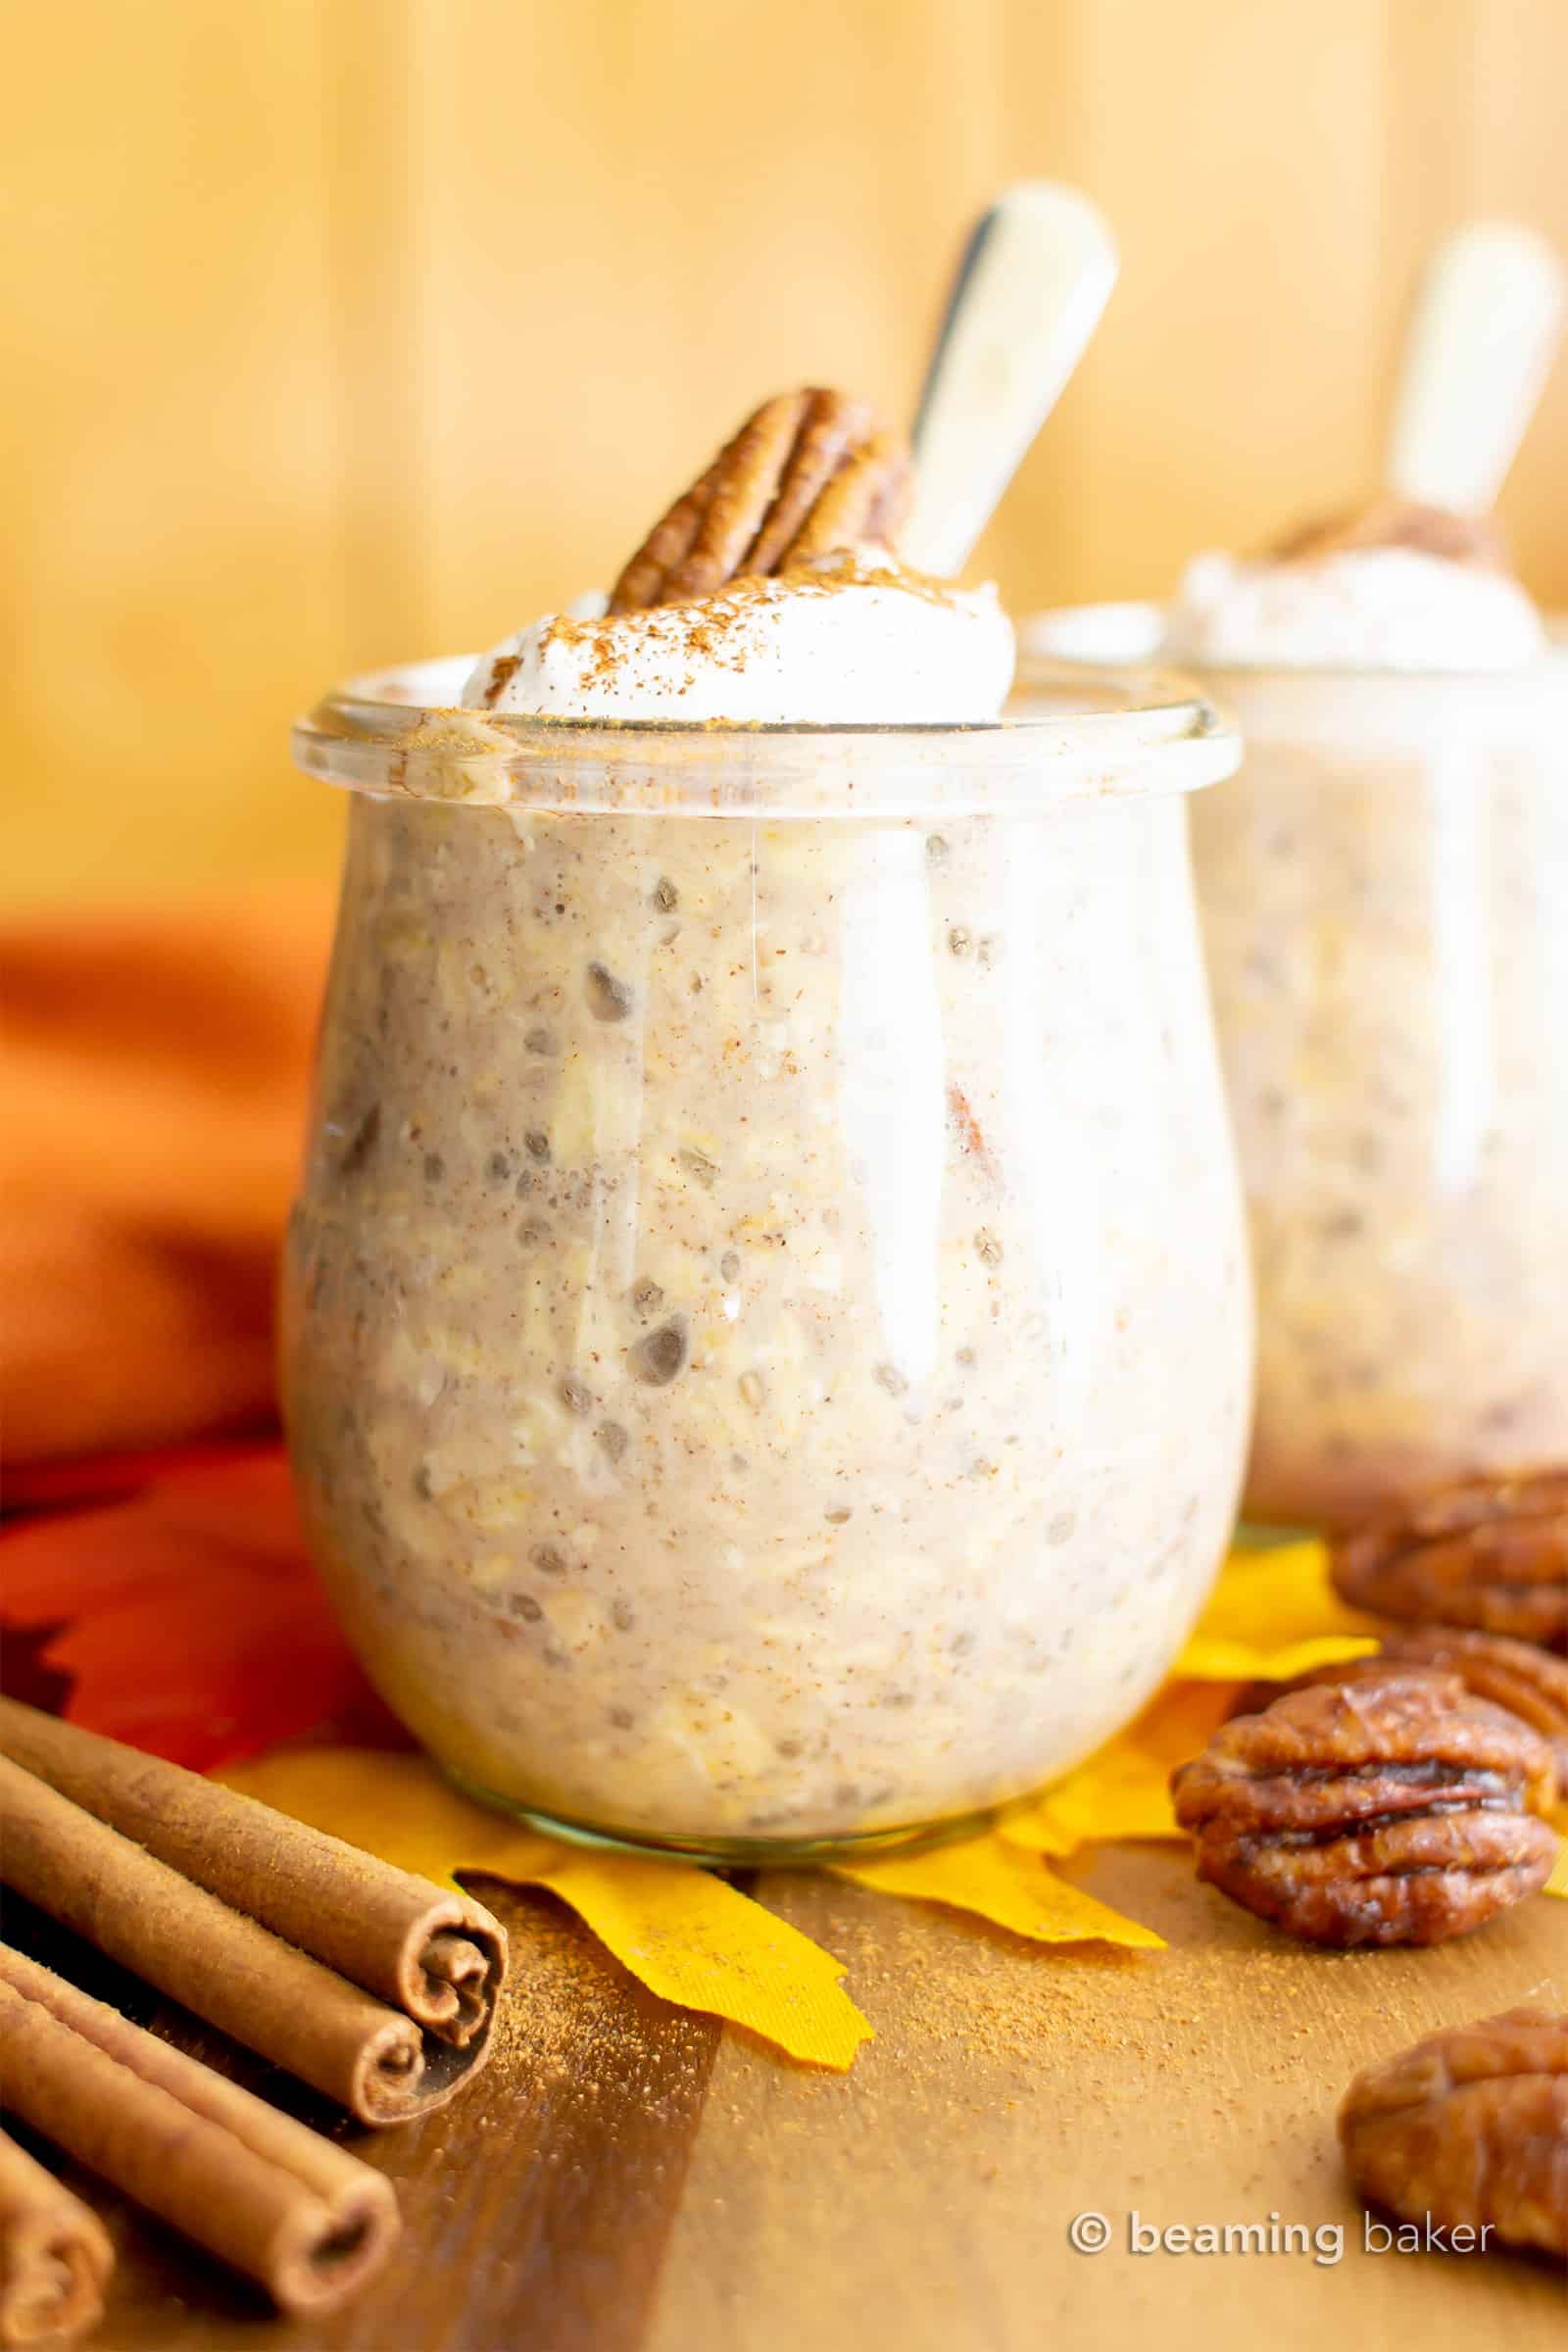 Pecan Pie Vegan Overnight Oats Recipe: this healthy vegan overnight oatmeal recipe is creamy, indulgent & tastes like pecan pie! Quick ‘n easy, made with whole ingredients, Gluten Free, Dairy-Free. #OvernightOats #Vegan #Healthy #Breakfast #GlutenFree | Recipe at BeamingBaker.com